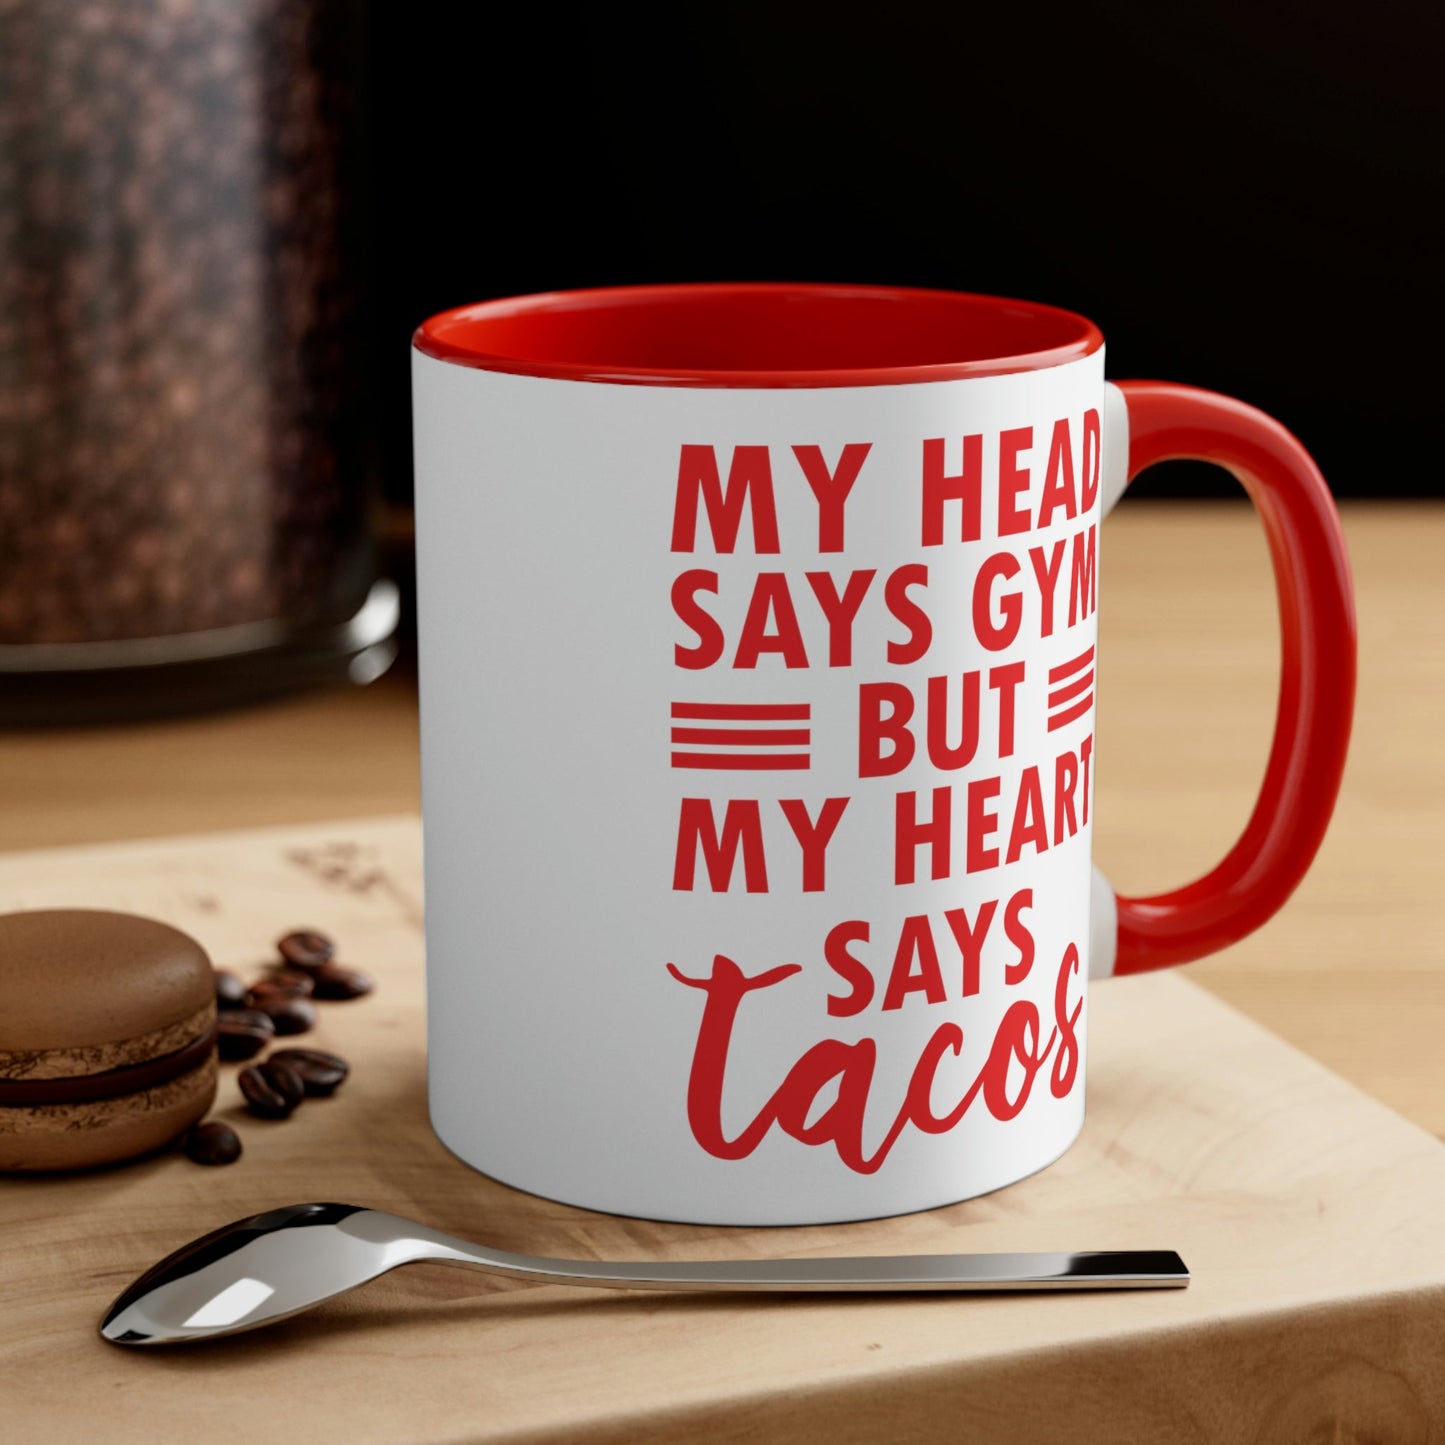 My Head Says Gym But My Heart Says Tacos Food Quotes Classic Accent Coffee Mug 11oz Ichaku [Perfect Gifts Selection]